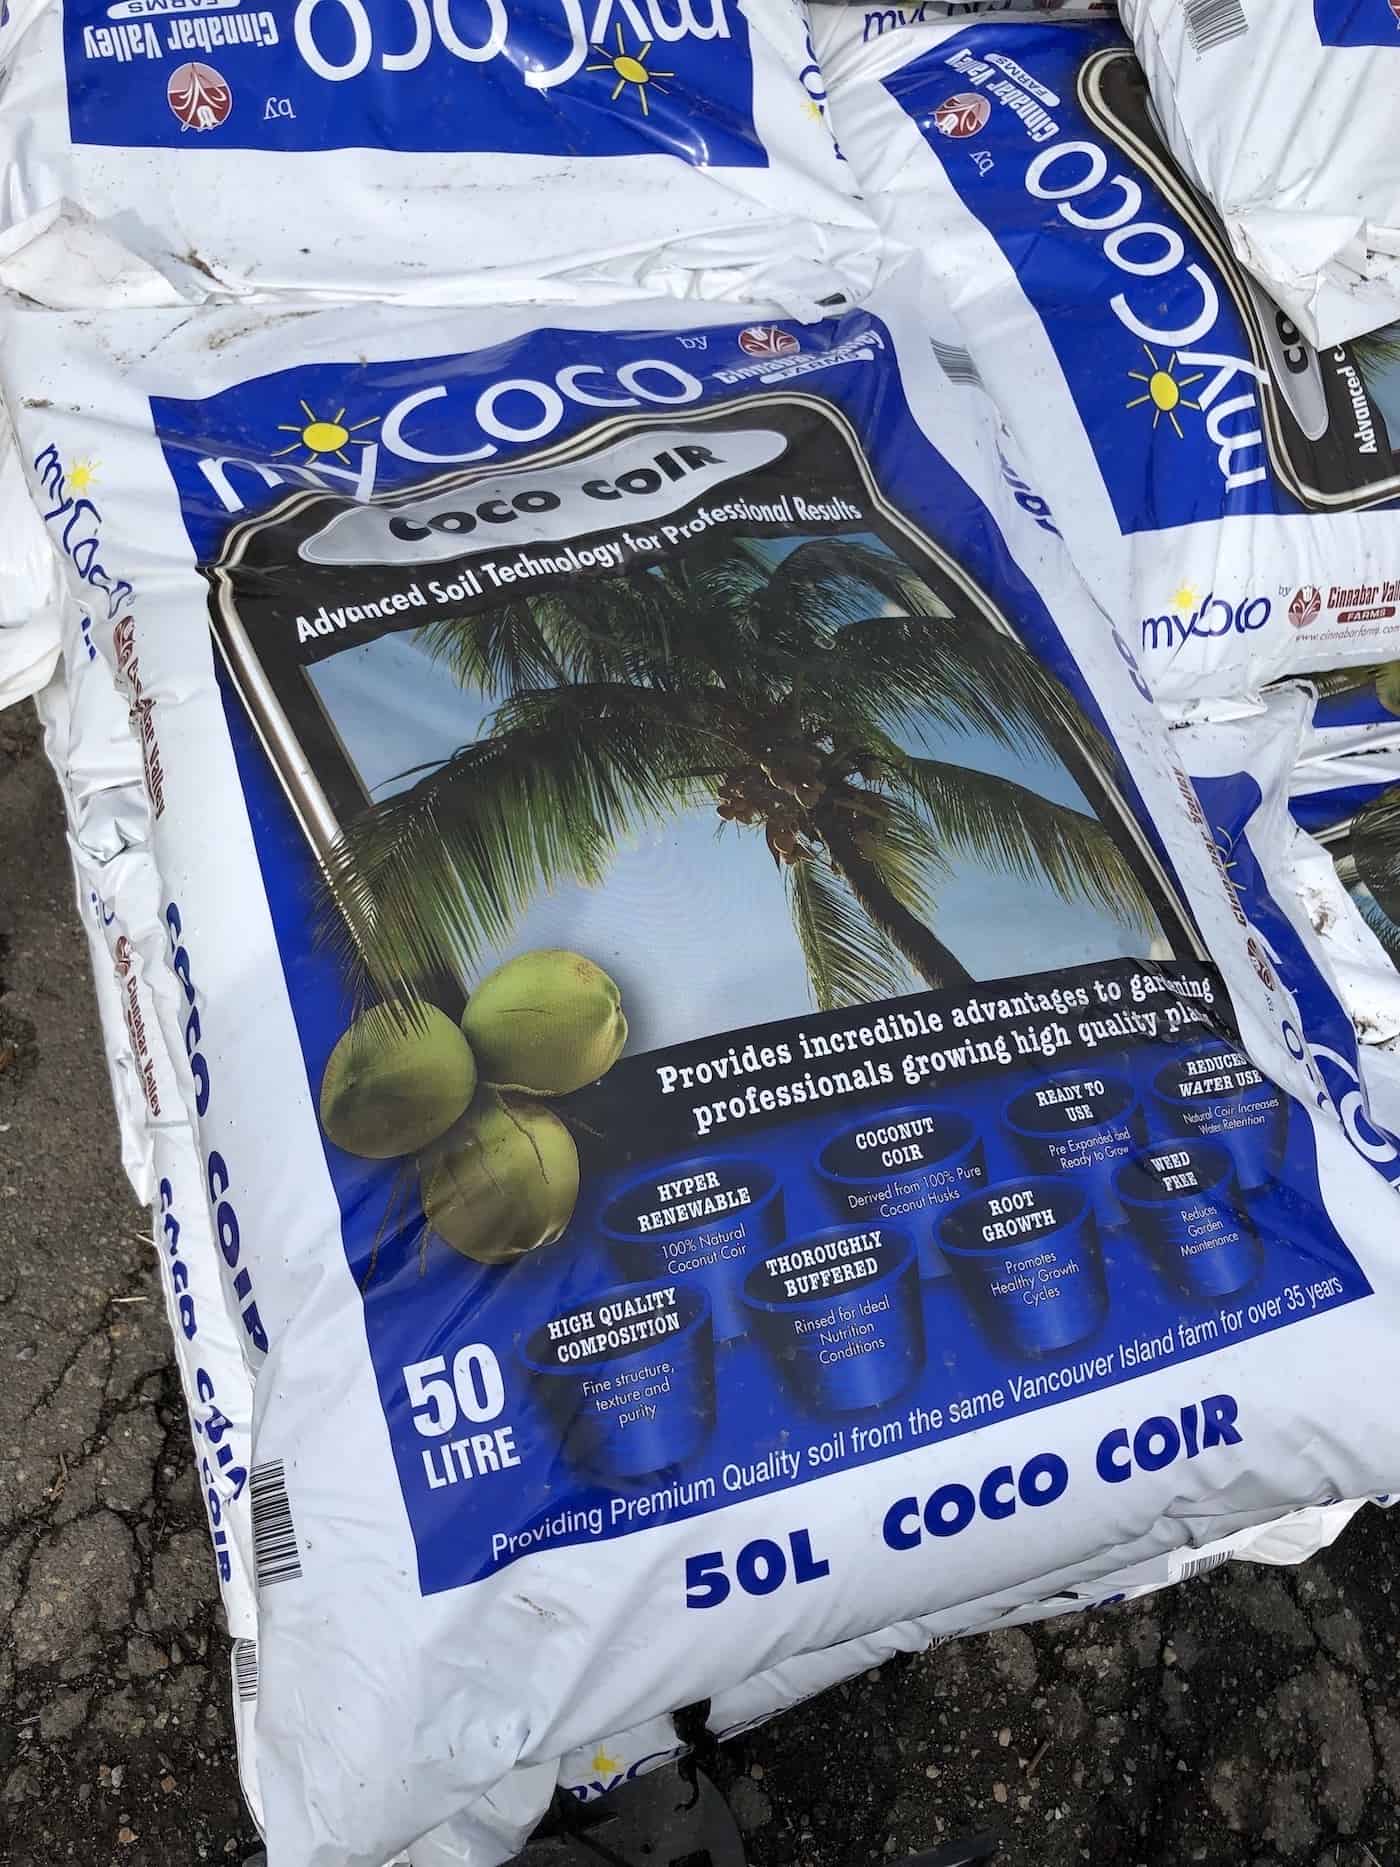 Bags of loose coco coir